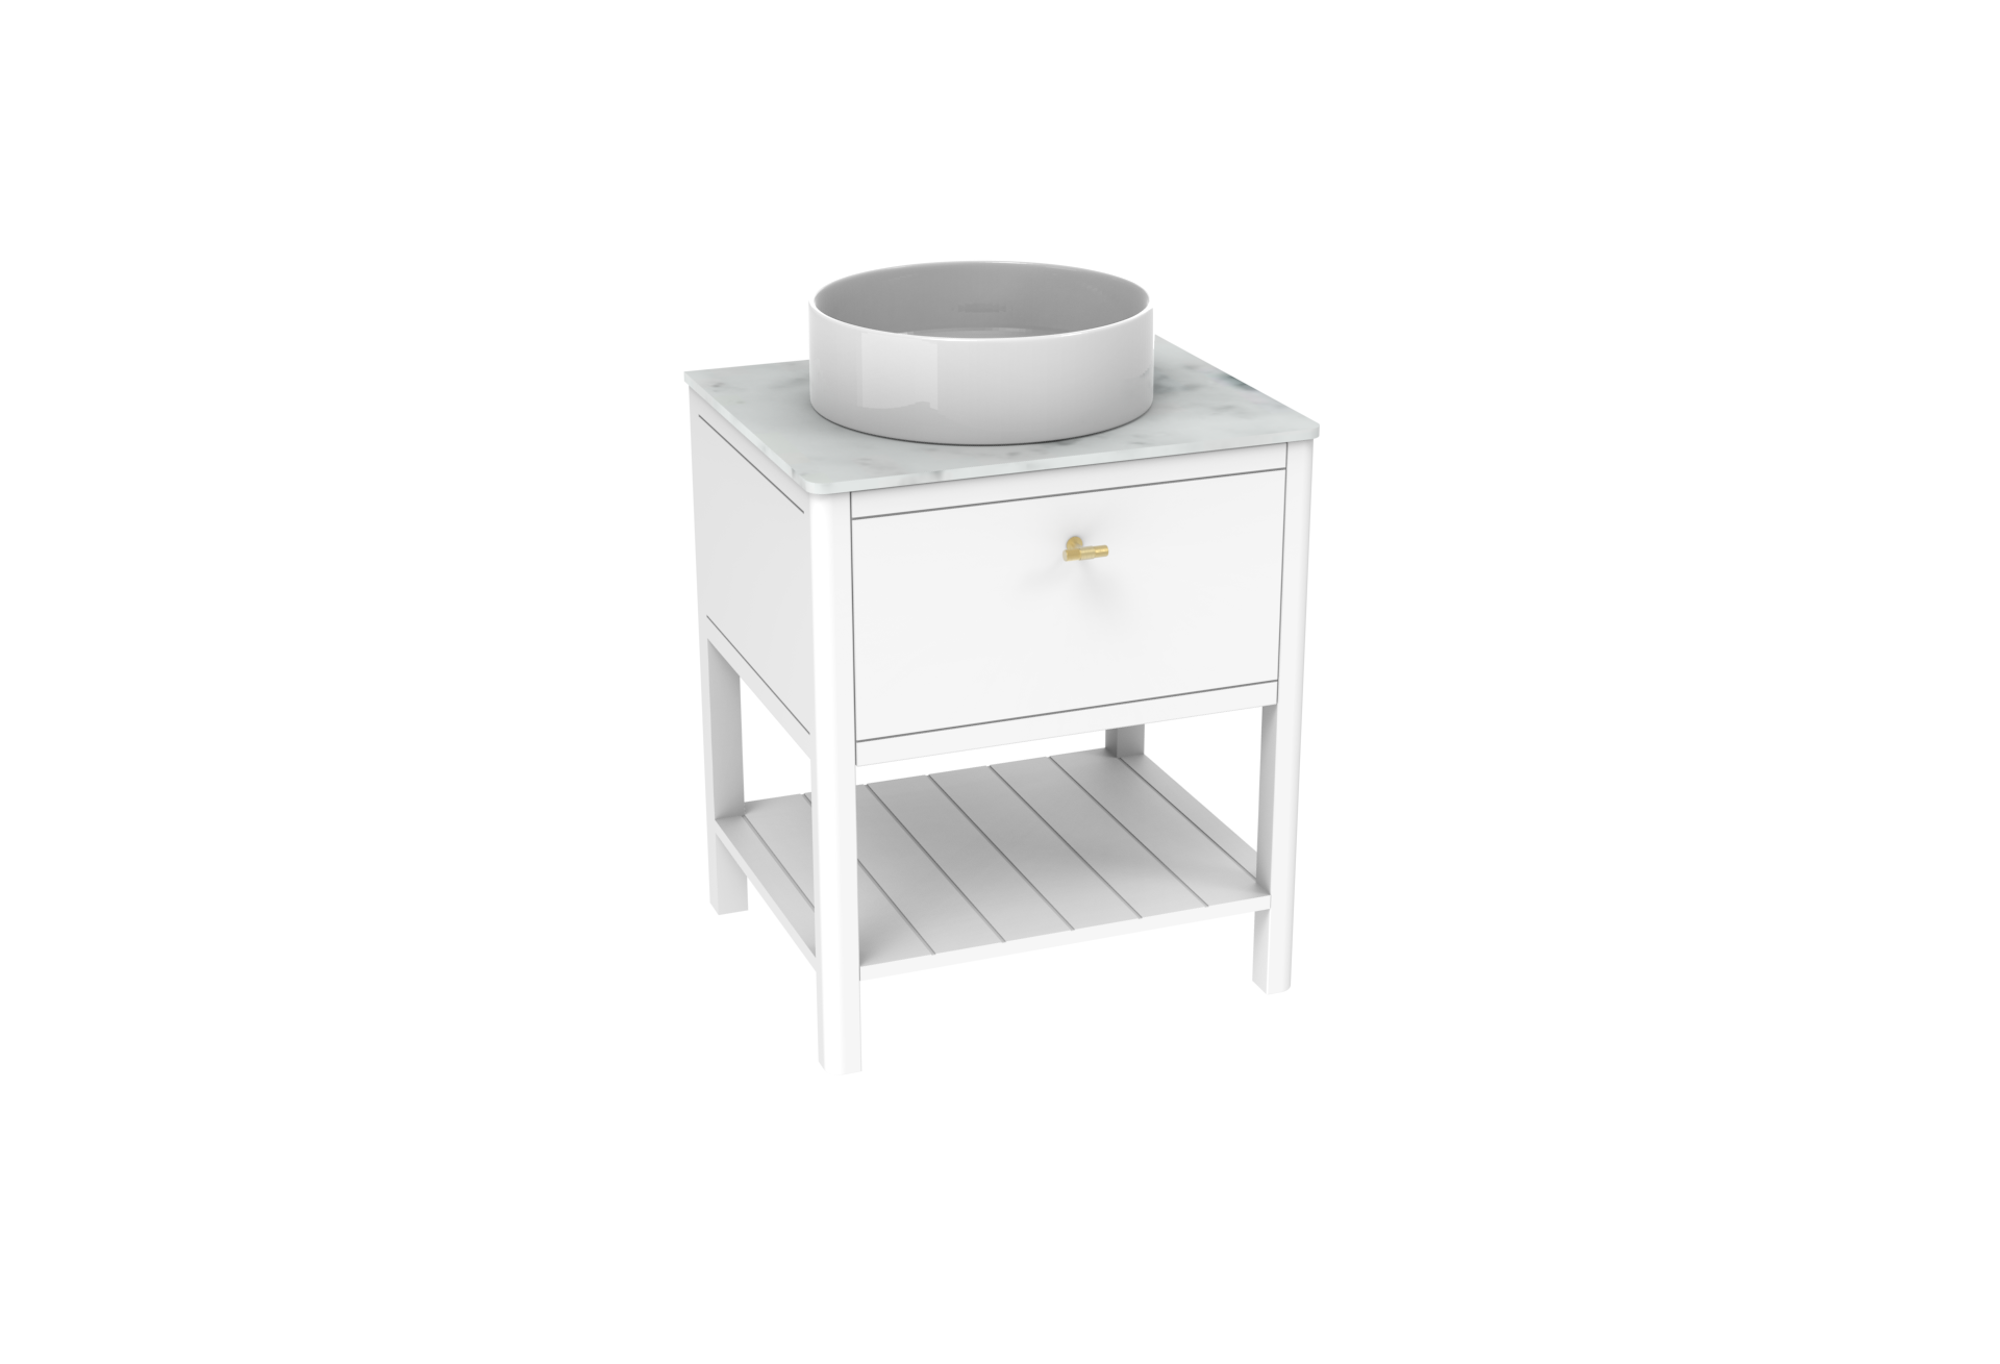 FRONTIER 60cm 1 drawer floor standing unit with undermount tray - Matte White